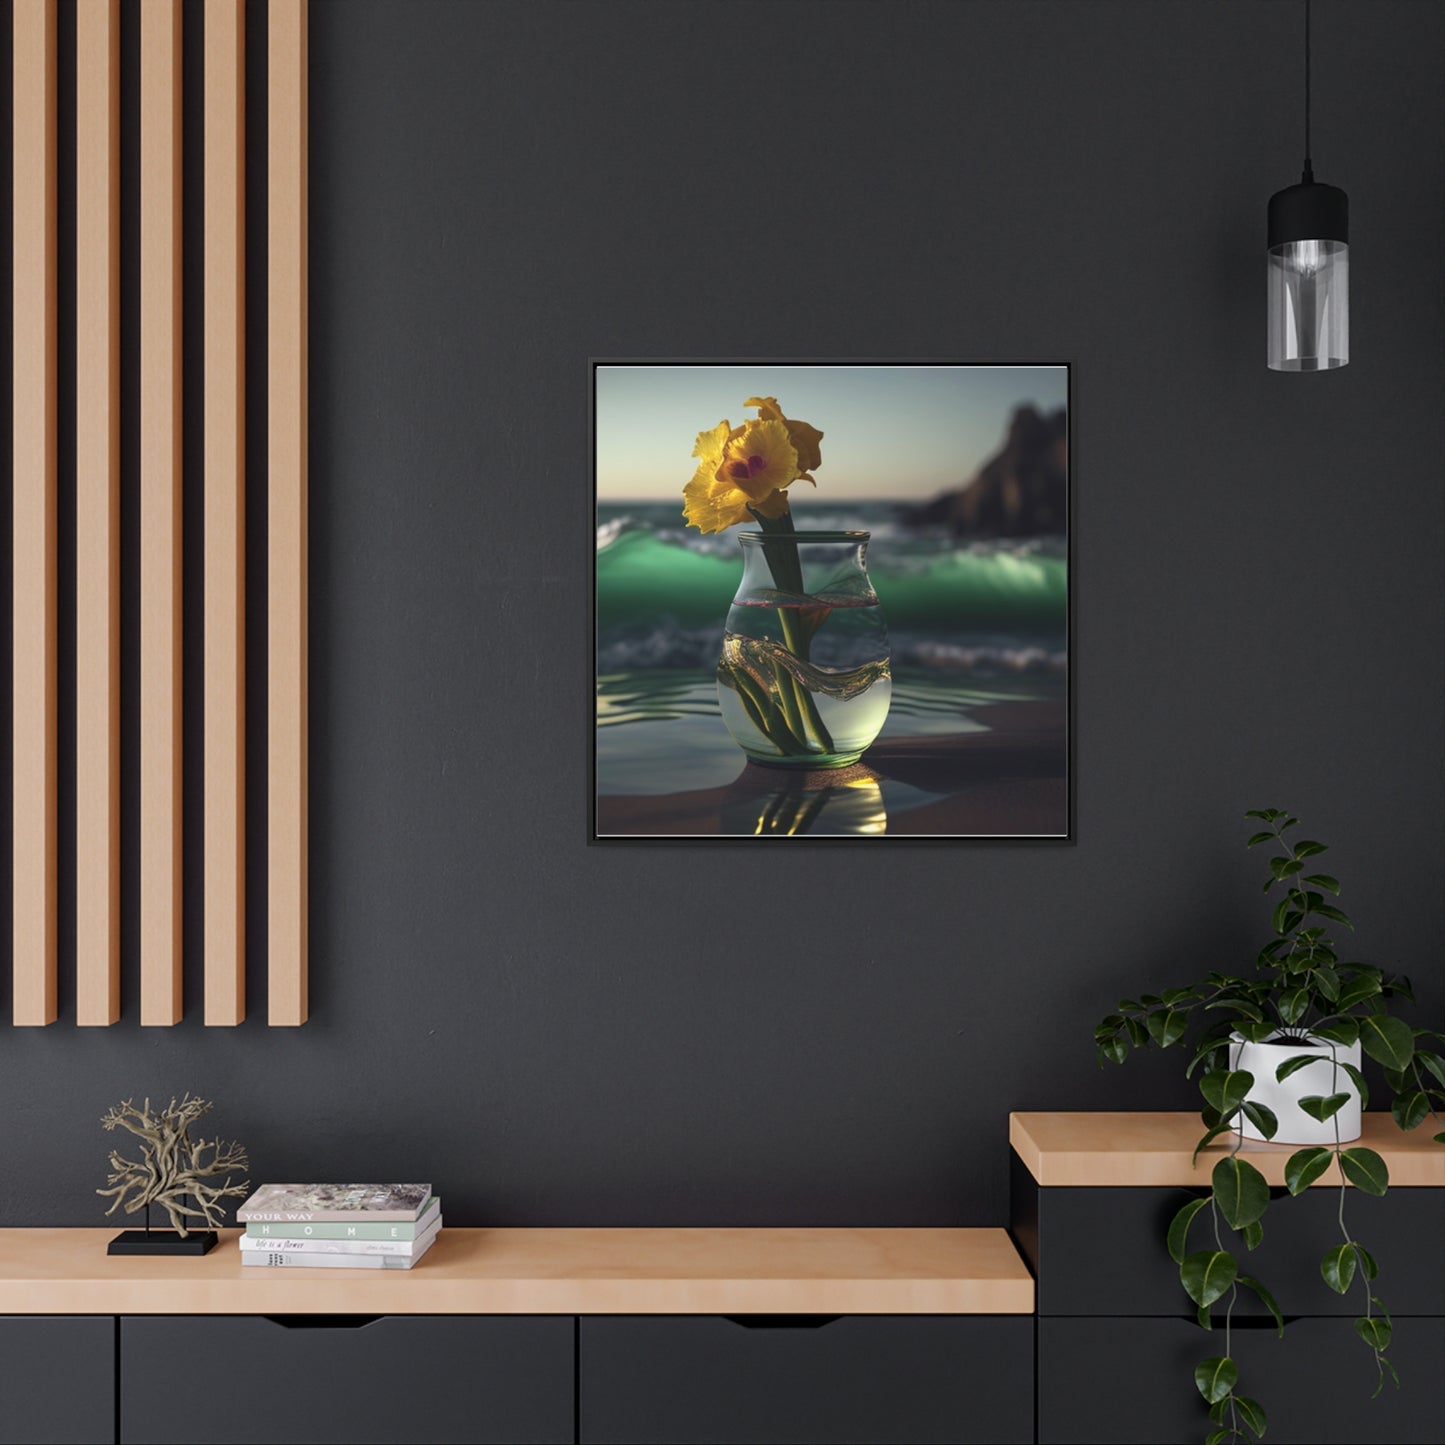 Gallery Canvas Wraps, Square Frame Yellow Gladiolus glass 1